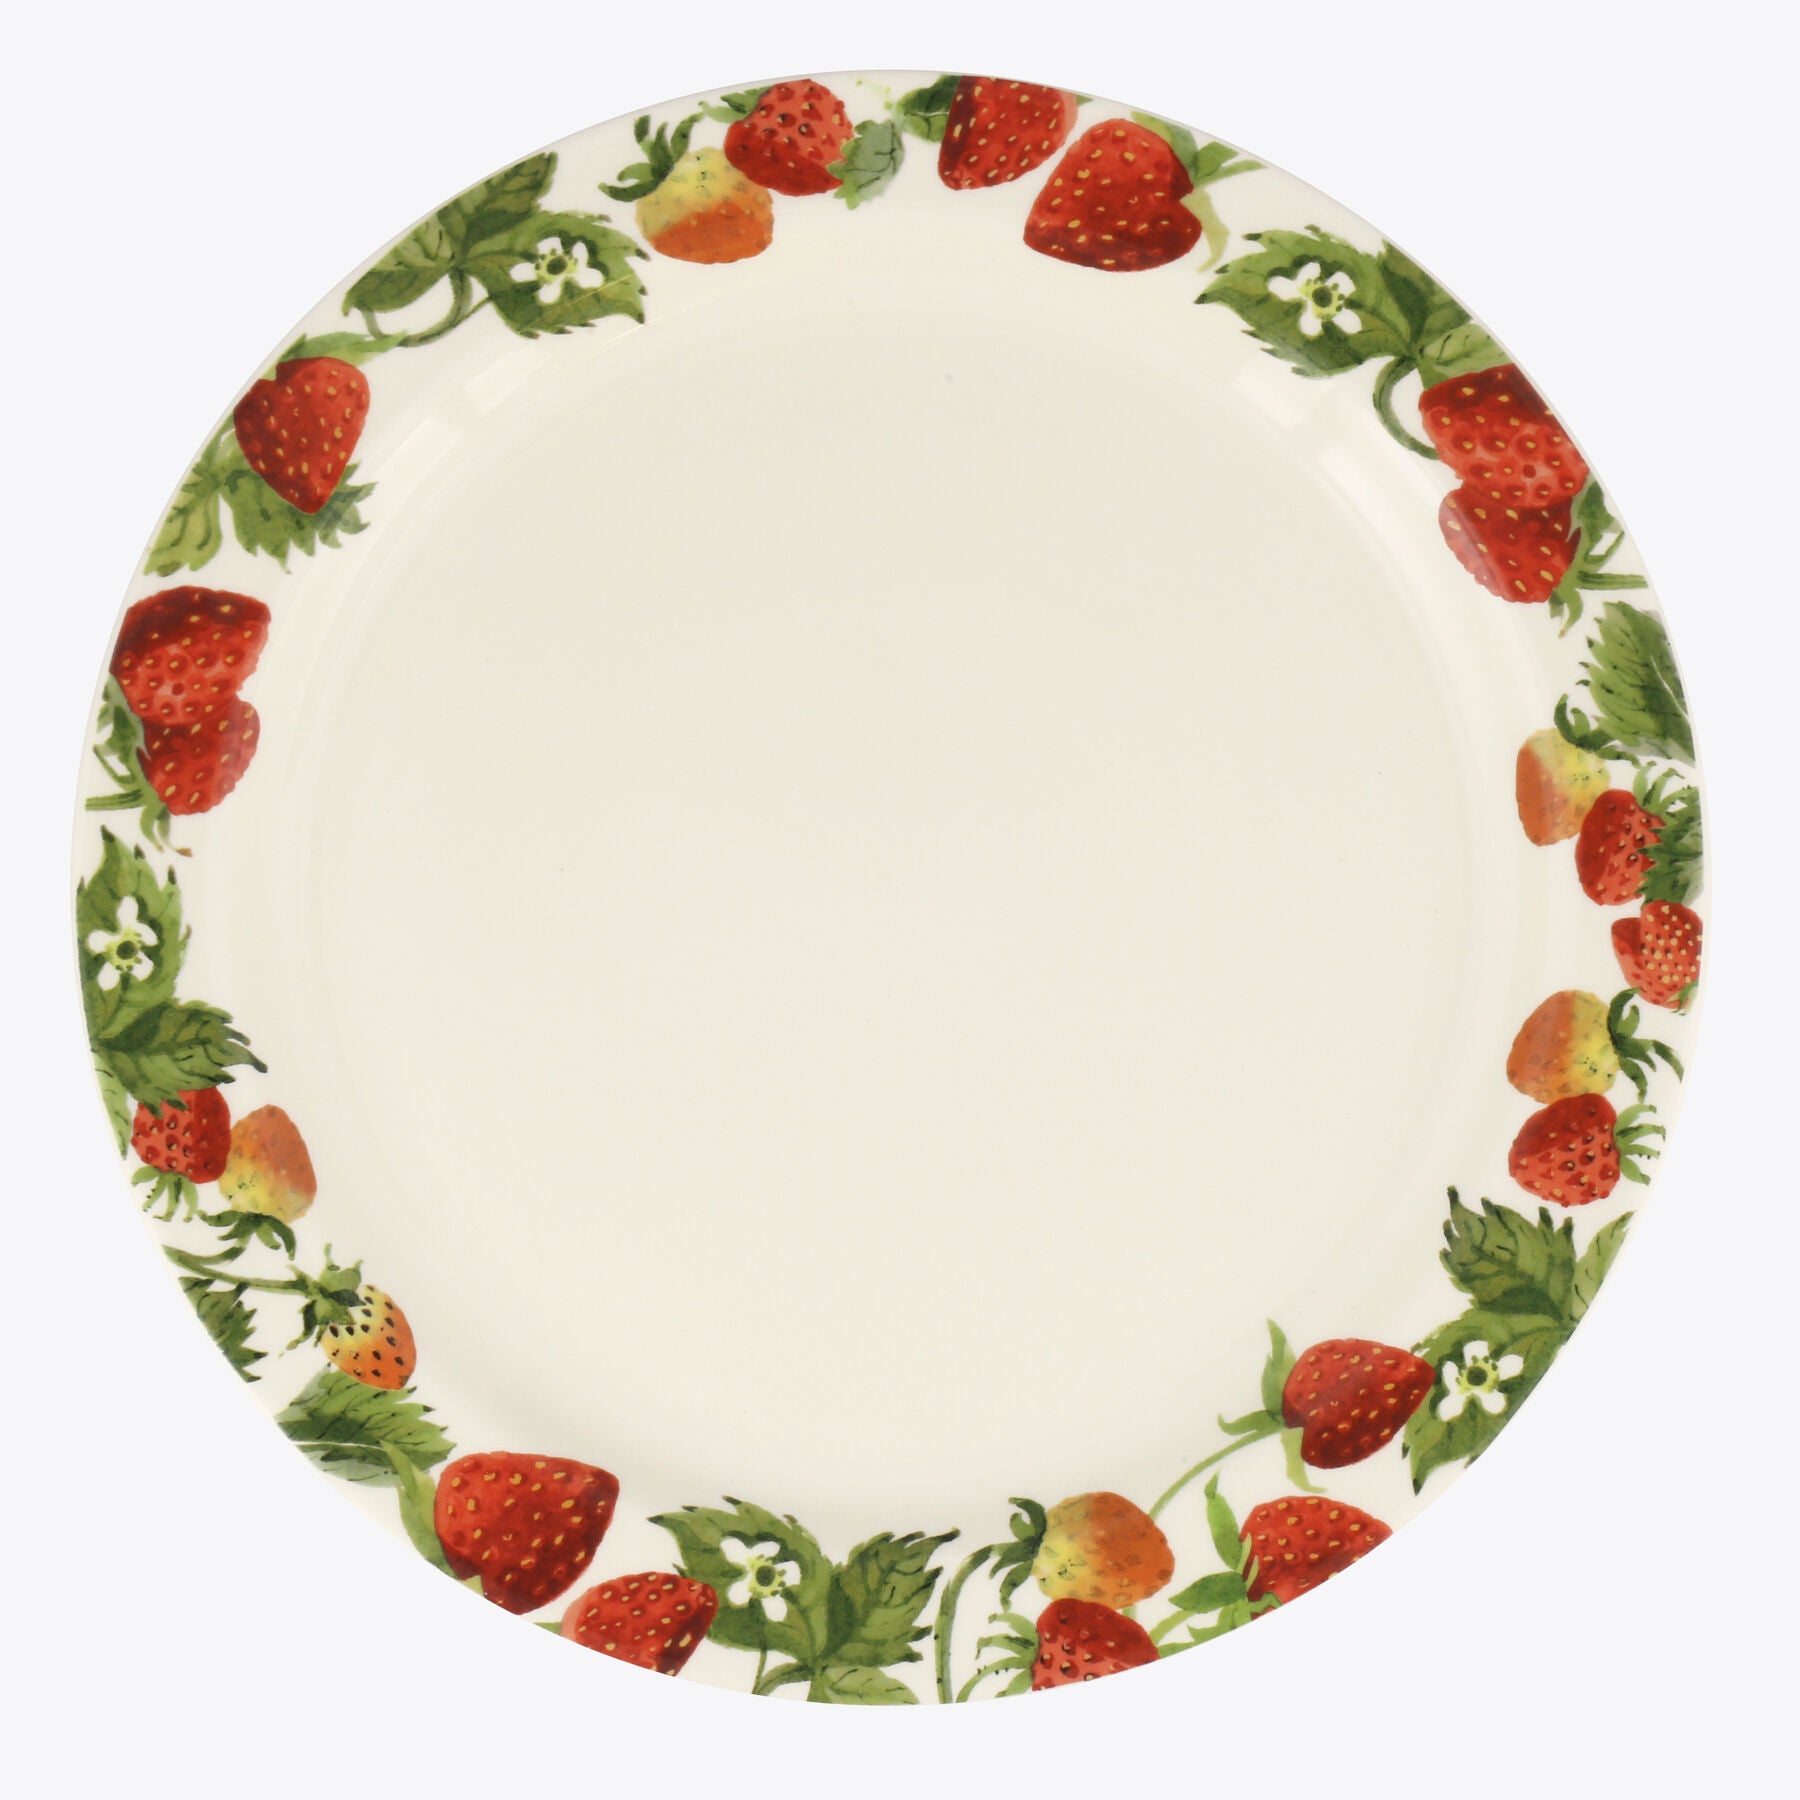 Strawberries Serving Plate - Unique Handmade & Handpainted English Earthenware British-Made Pottery 